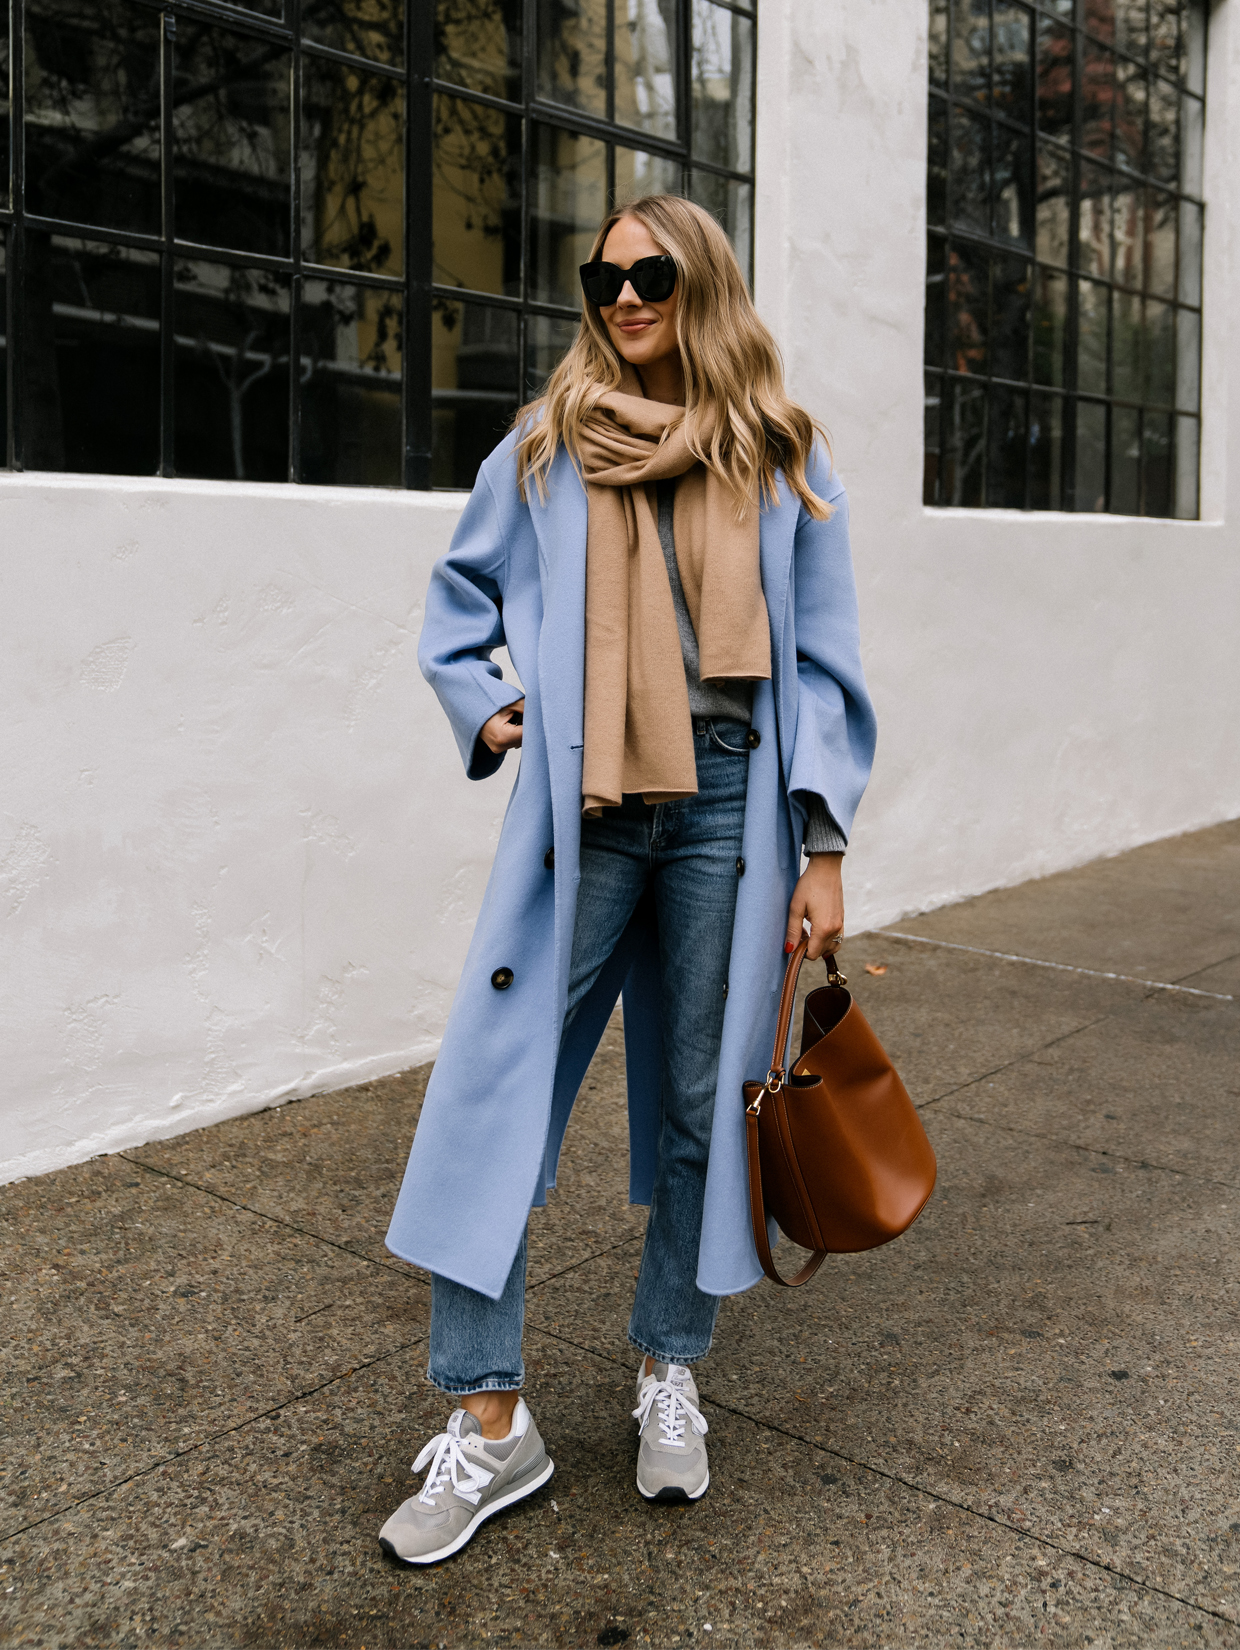 3 Winter Shoe Trends That Look Best With Leggings and Jeans